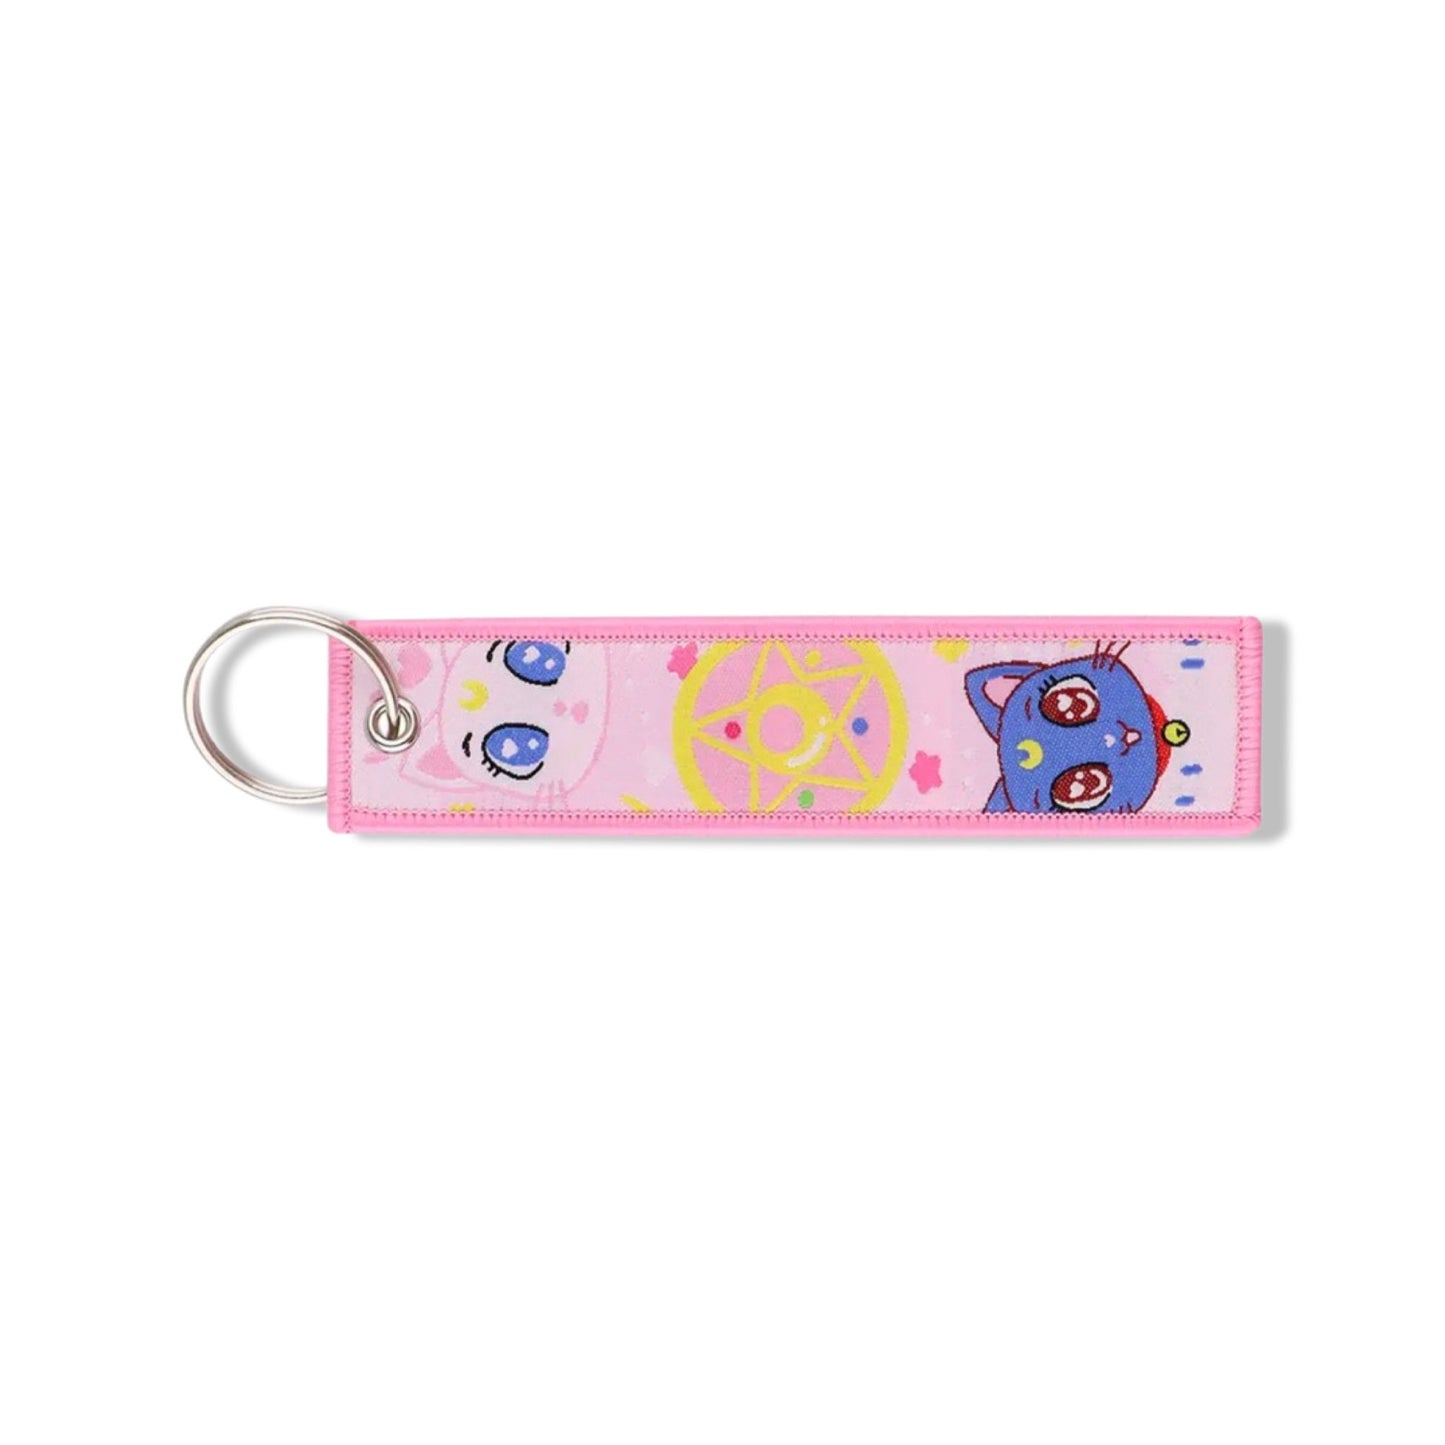 Luna and Artemis Sailor Moon Embroidered Fabric Keychain